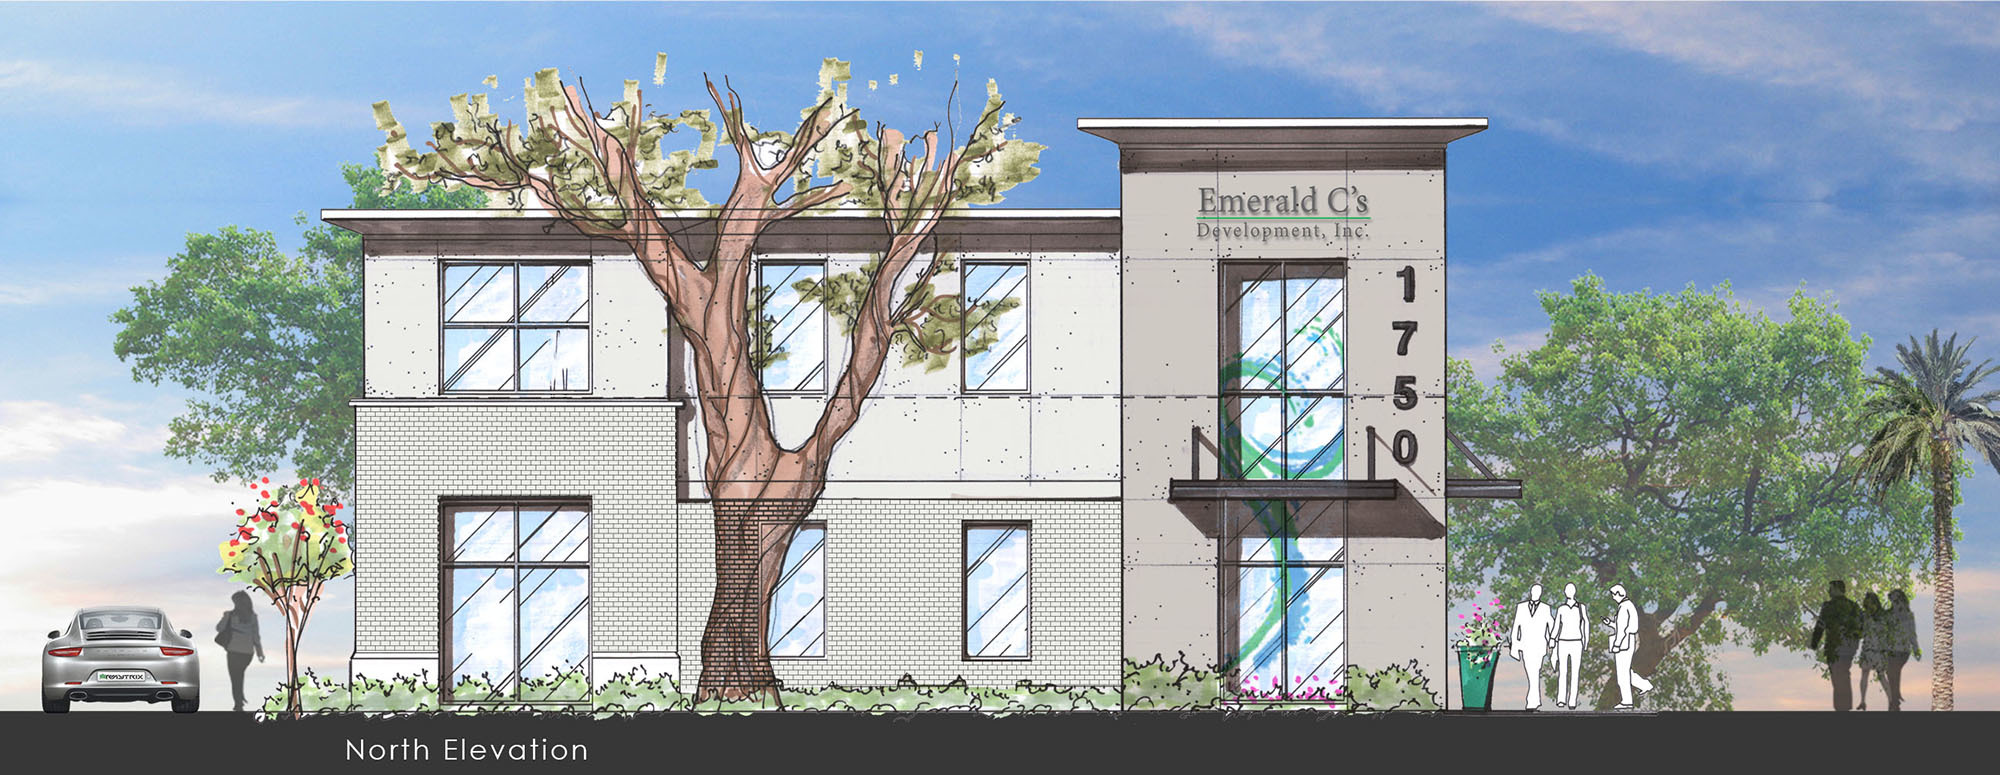 An artist’s rendering of the renovated Emerald C’s Development Inc. headquarters in Talleyrand.